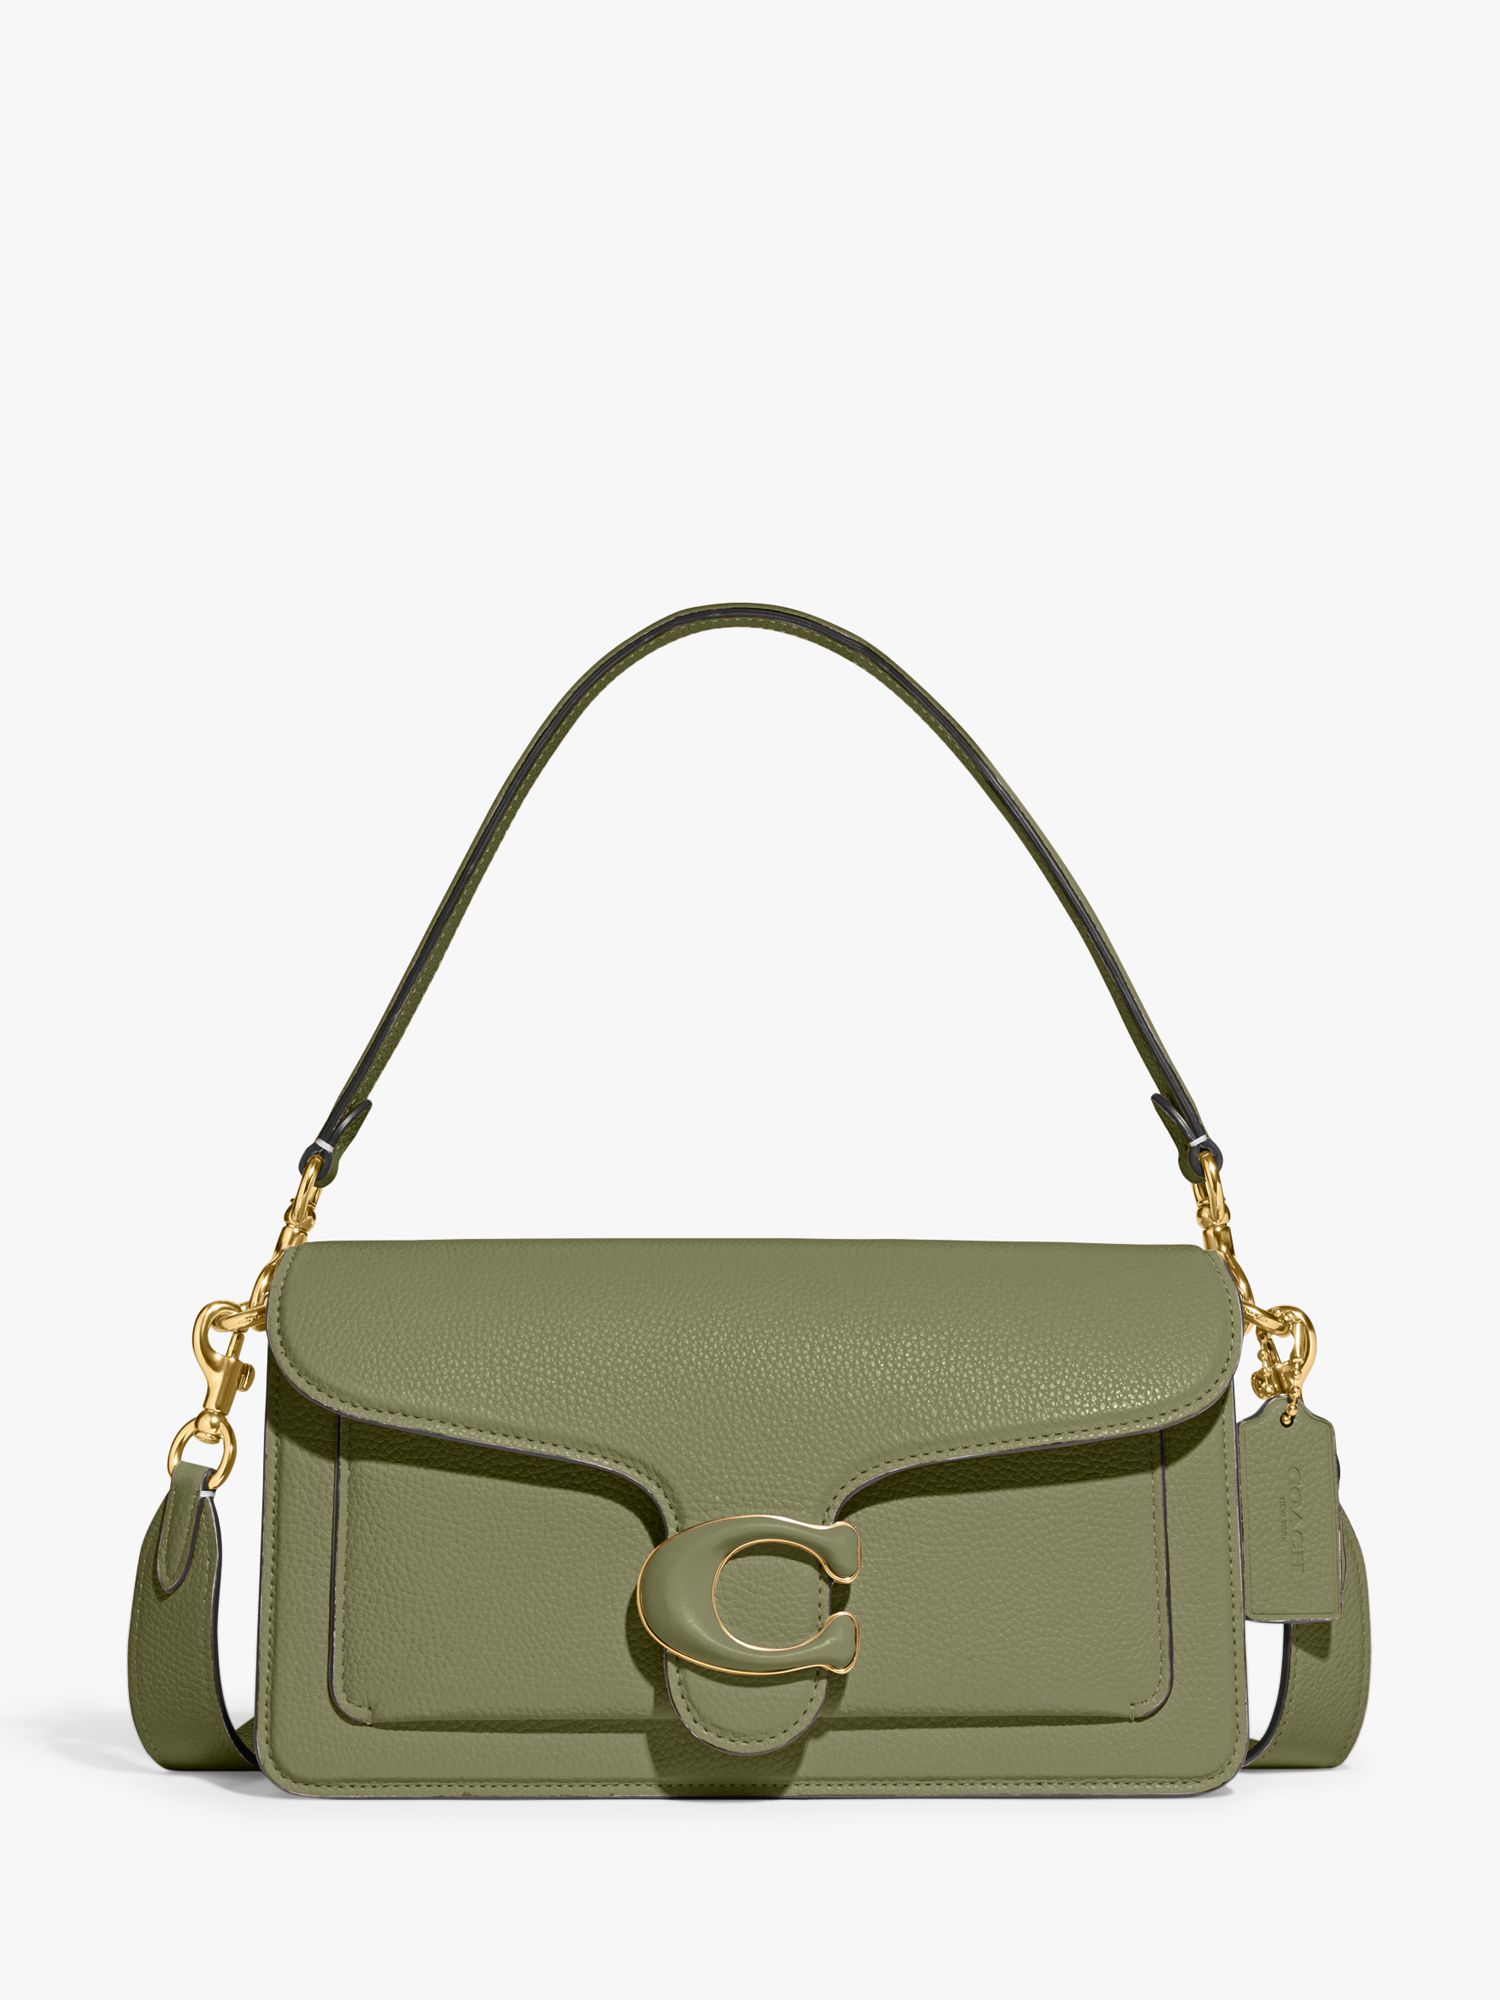 Coach Tabby 26 Leather Shoulder Bag, Moss at John Lewis & Partners